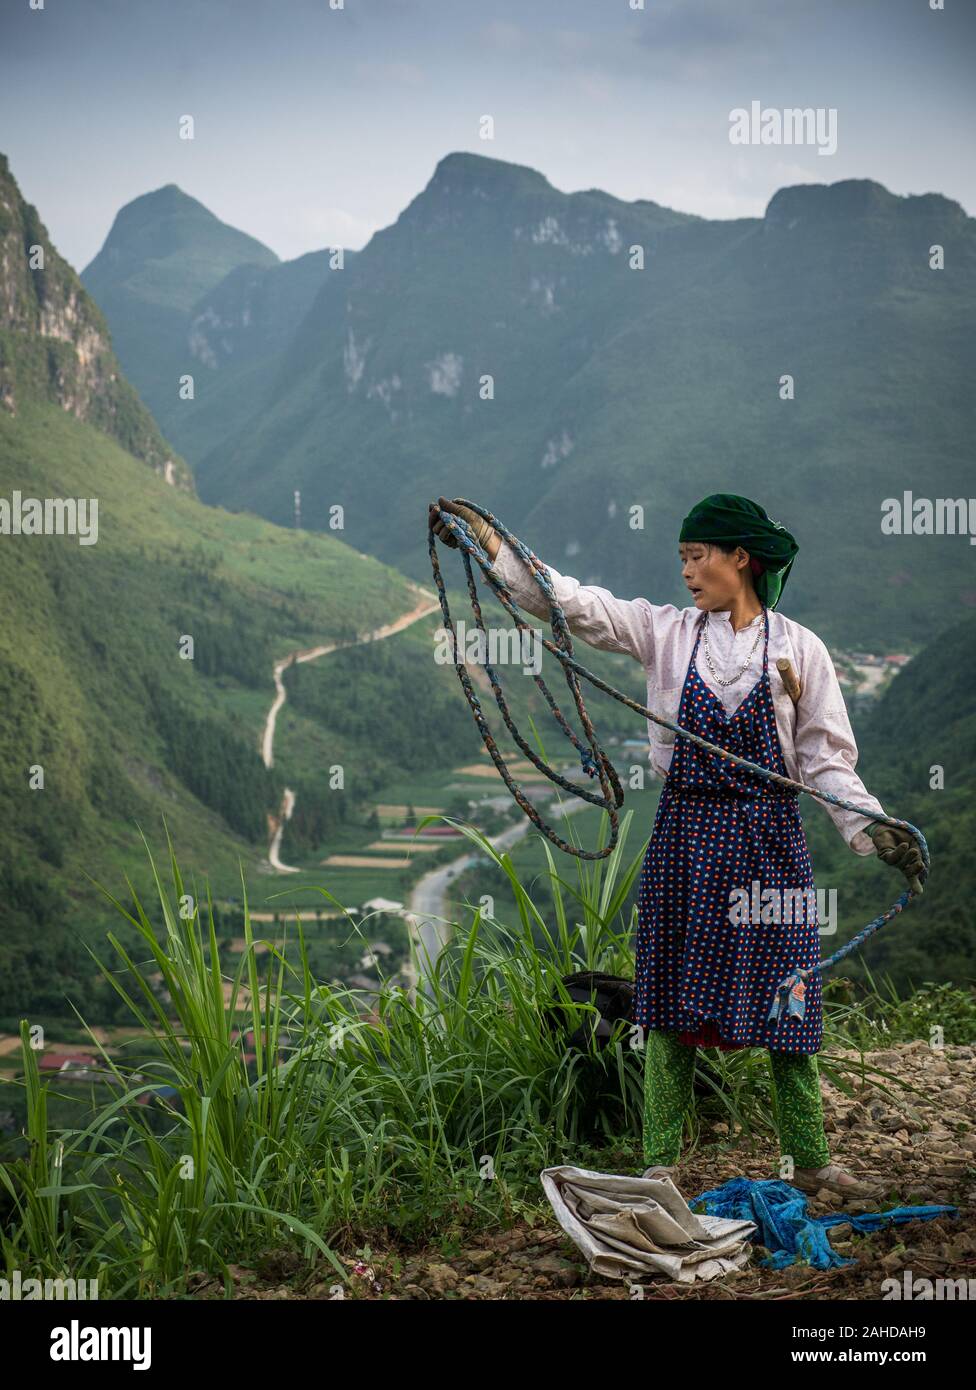 Female Vietnamese farmer of ethnic minority rolling up rope in the mountains of North Vietnam, vibrant green karst mountains in the background Stock Photo